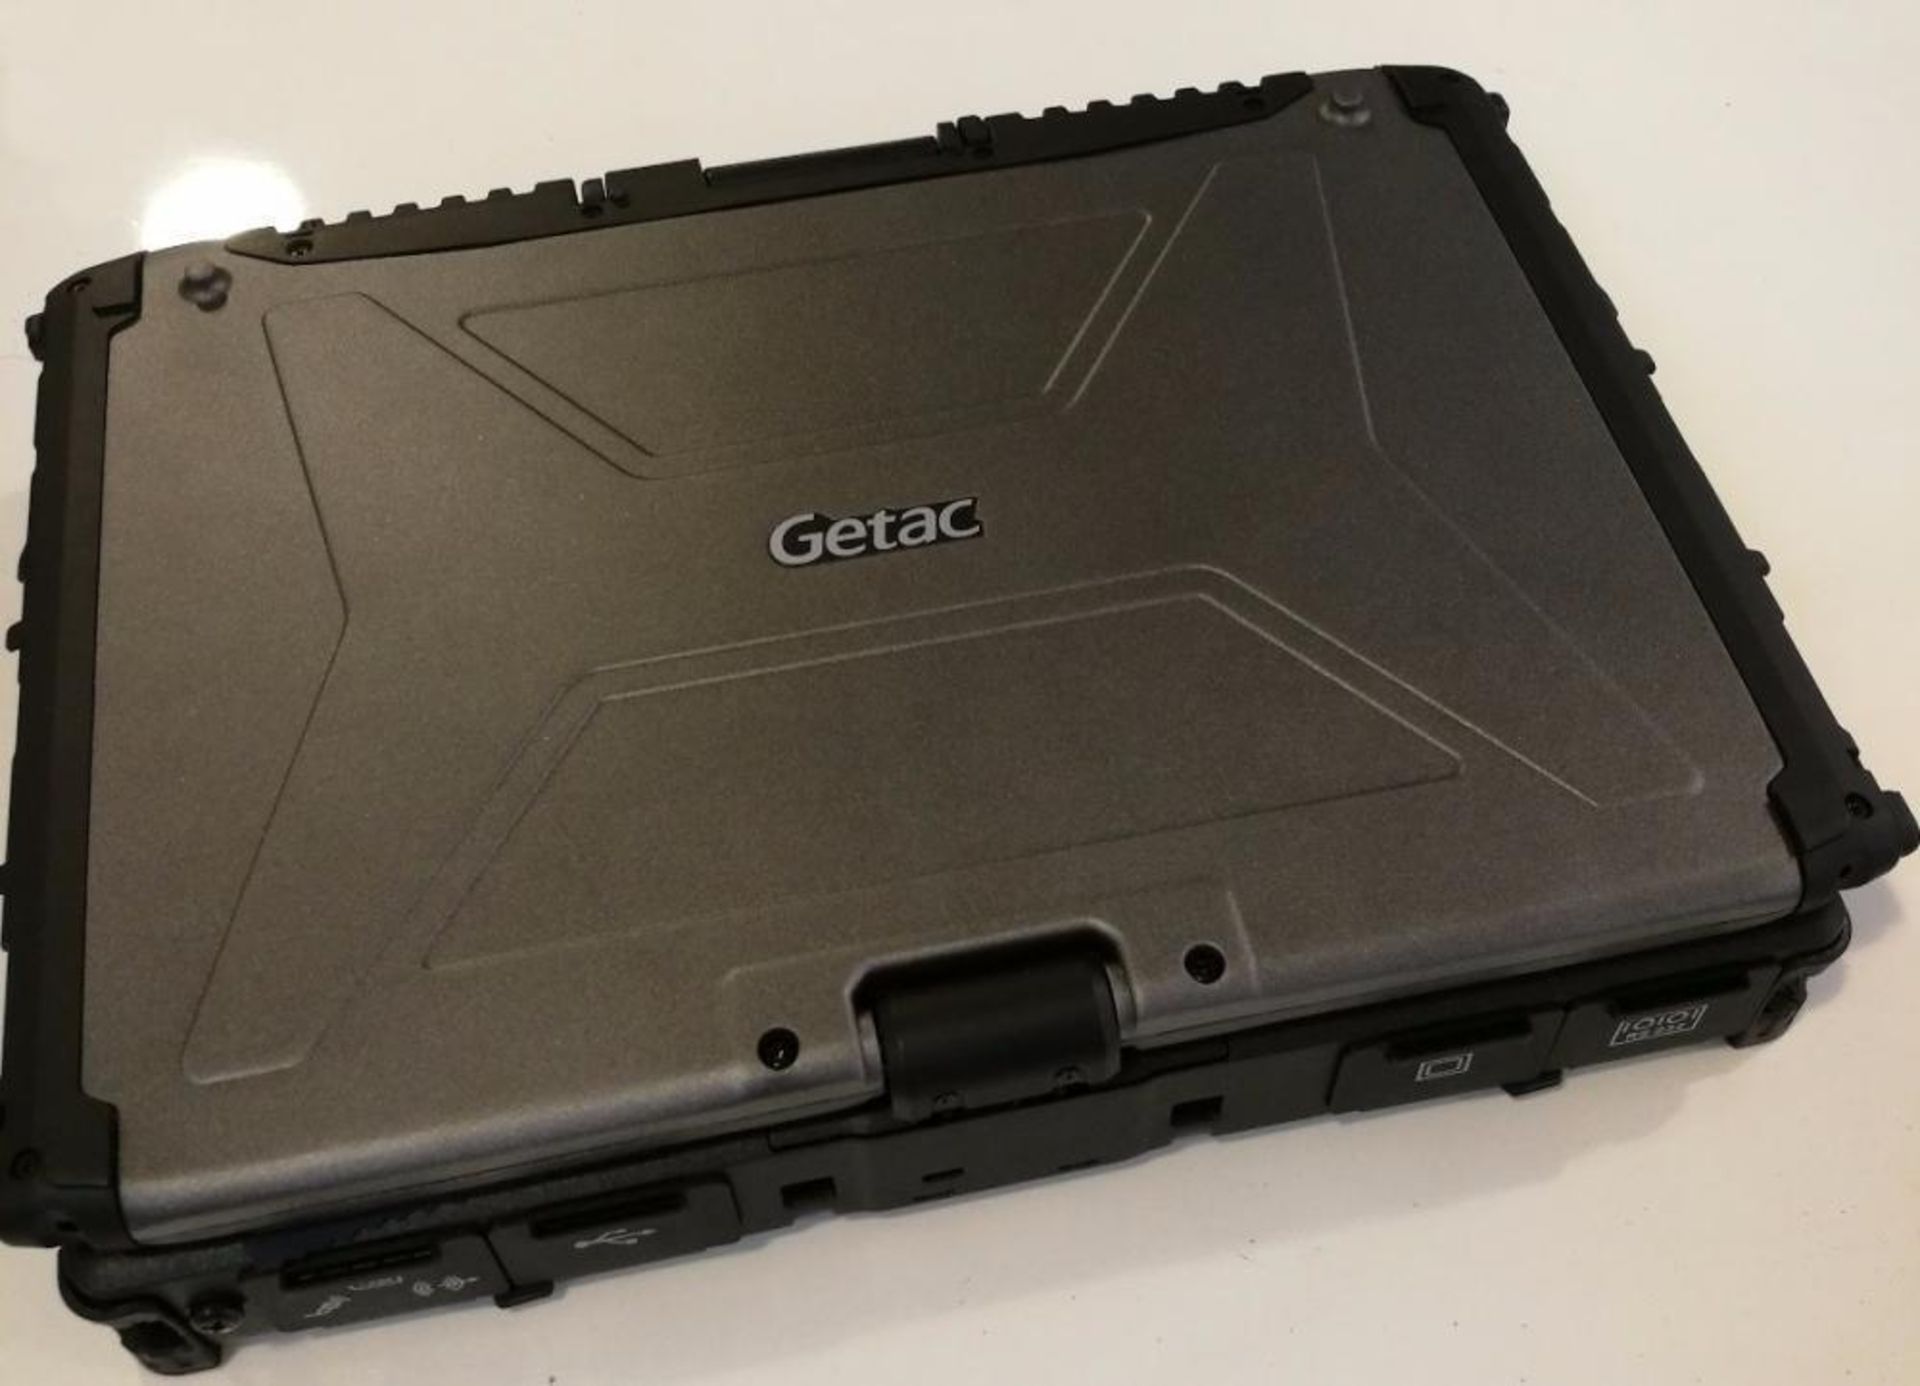 1 x Getac V200 Rugged Laptop Computer - Rugged Laptop That Transforms into a Tablet PC - Features an - Image 4 of 8